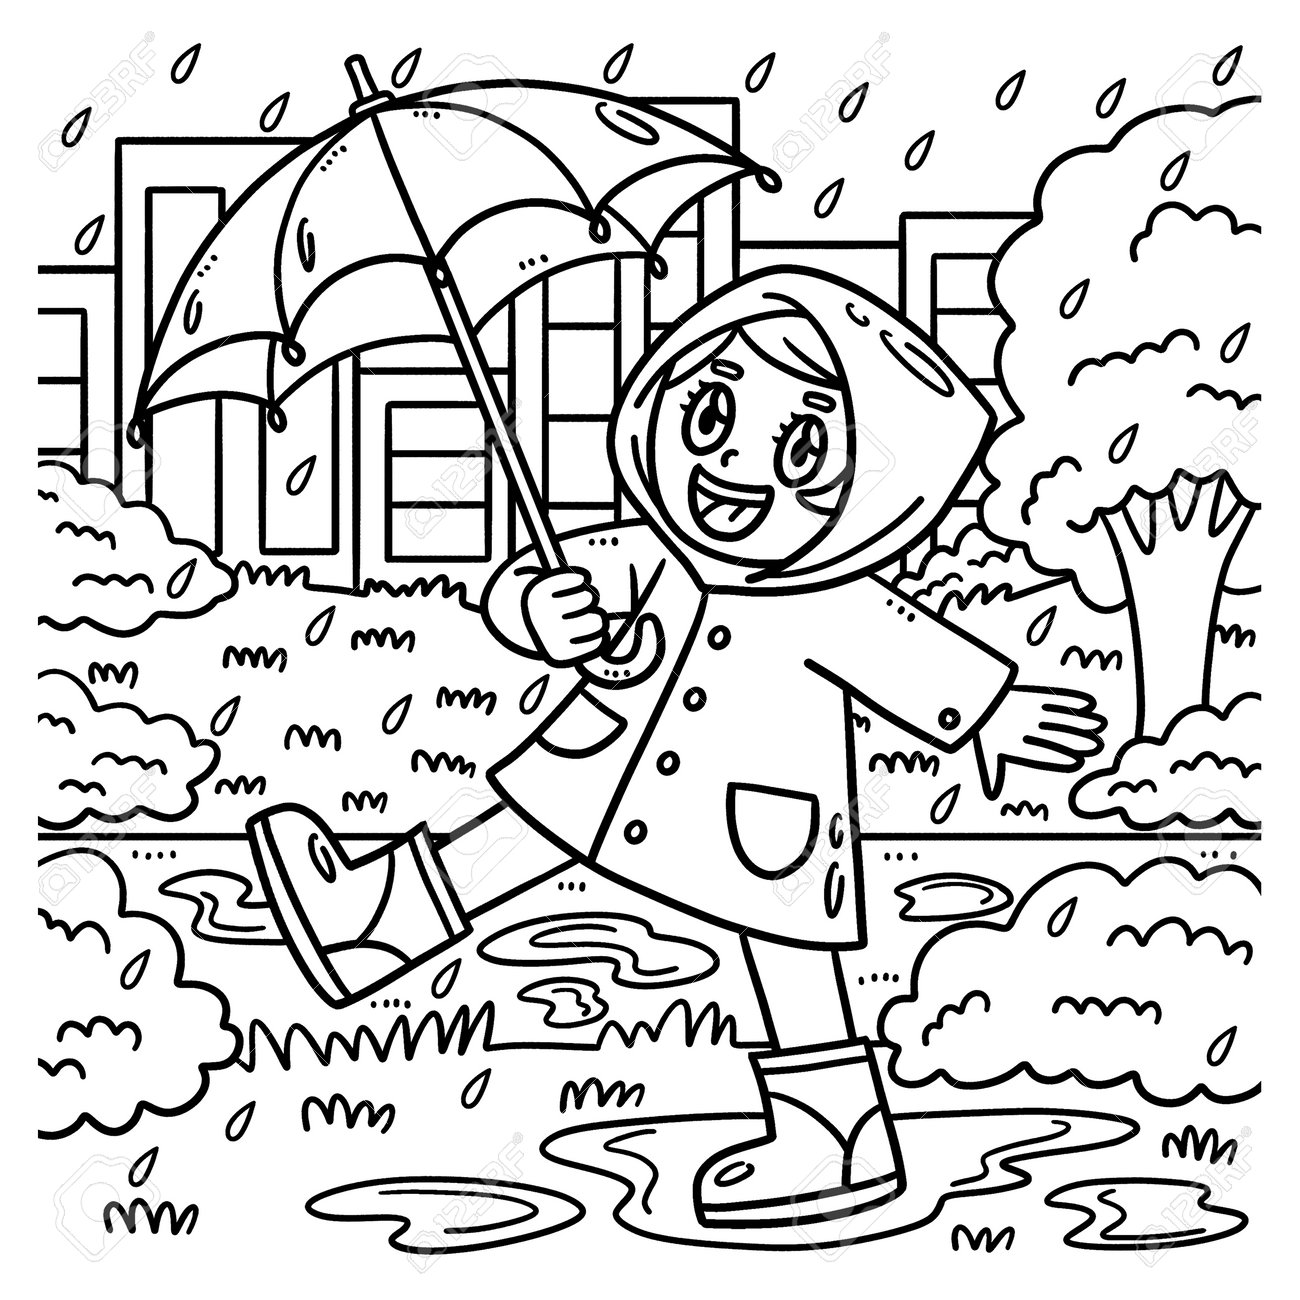 Spring girl enjoying the rain coloring page royalty free svg cliparts vectors and stock illustration image